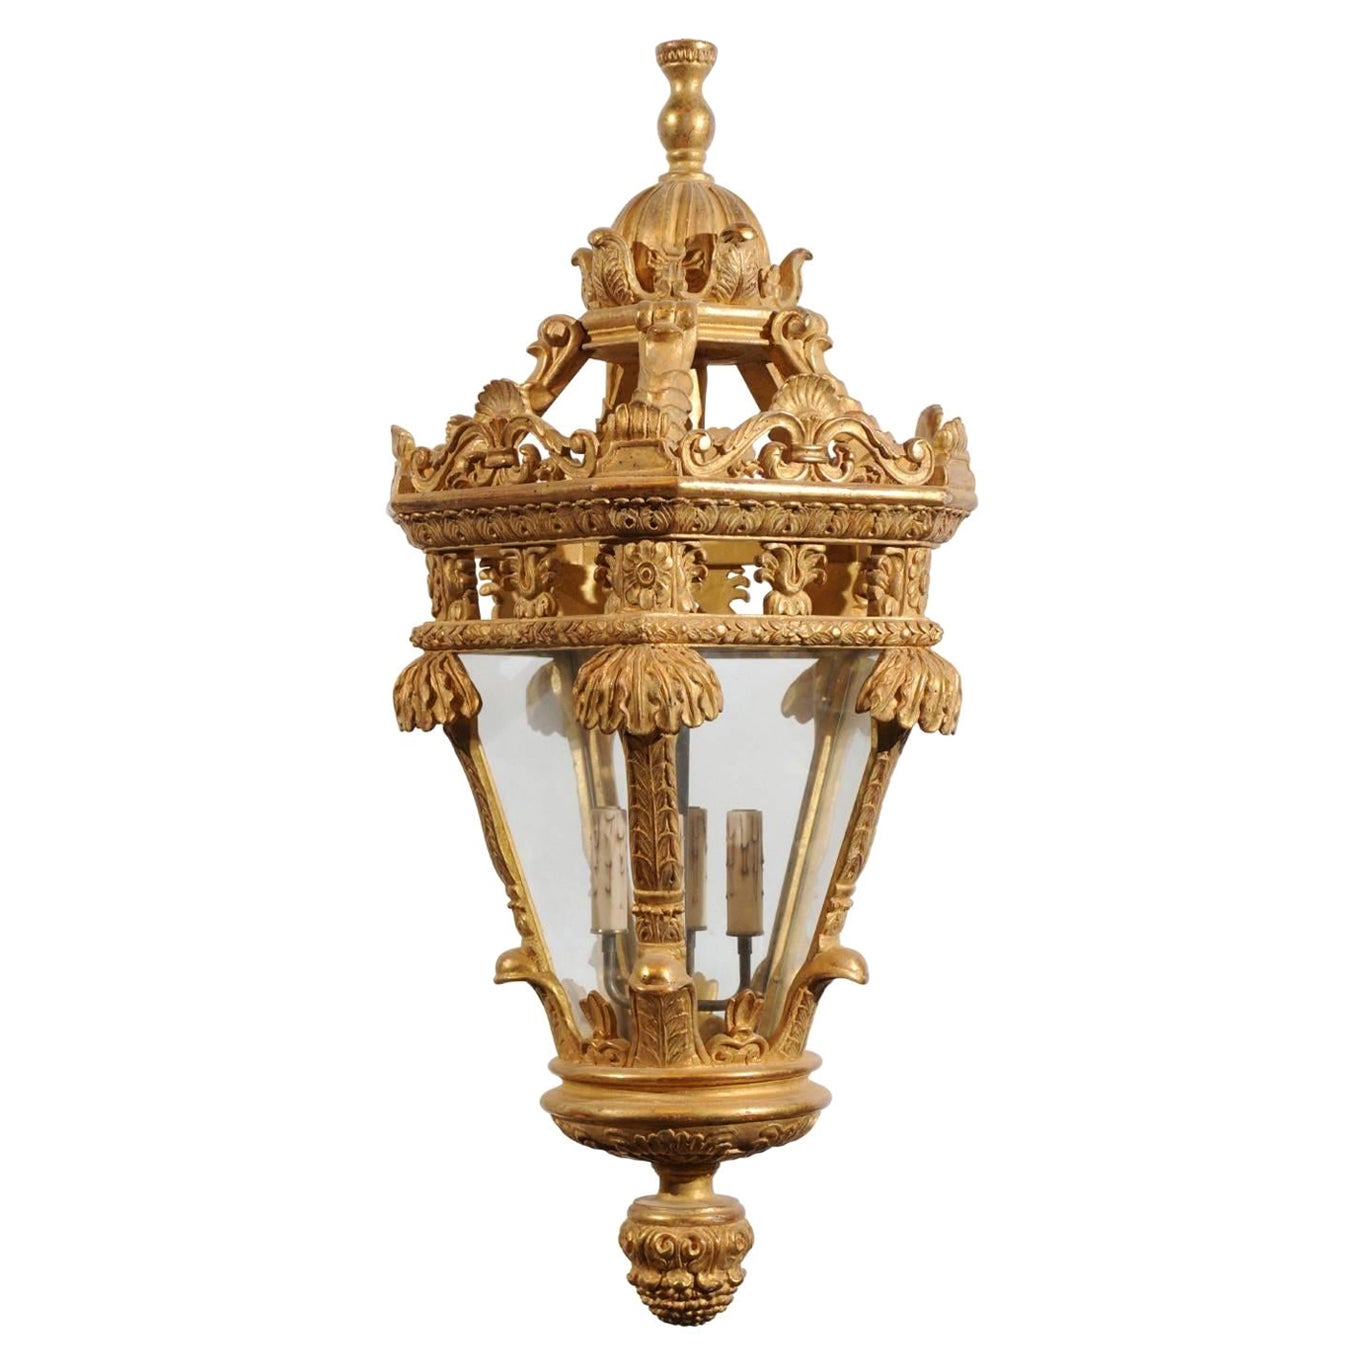 Large Giltwood Lantern with 4 Lights, Hand-Carved Reproduction